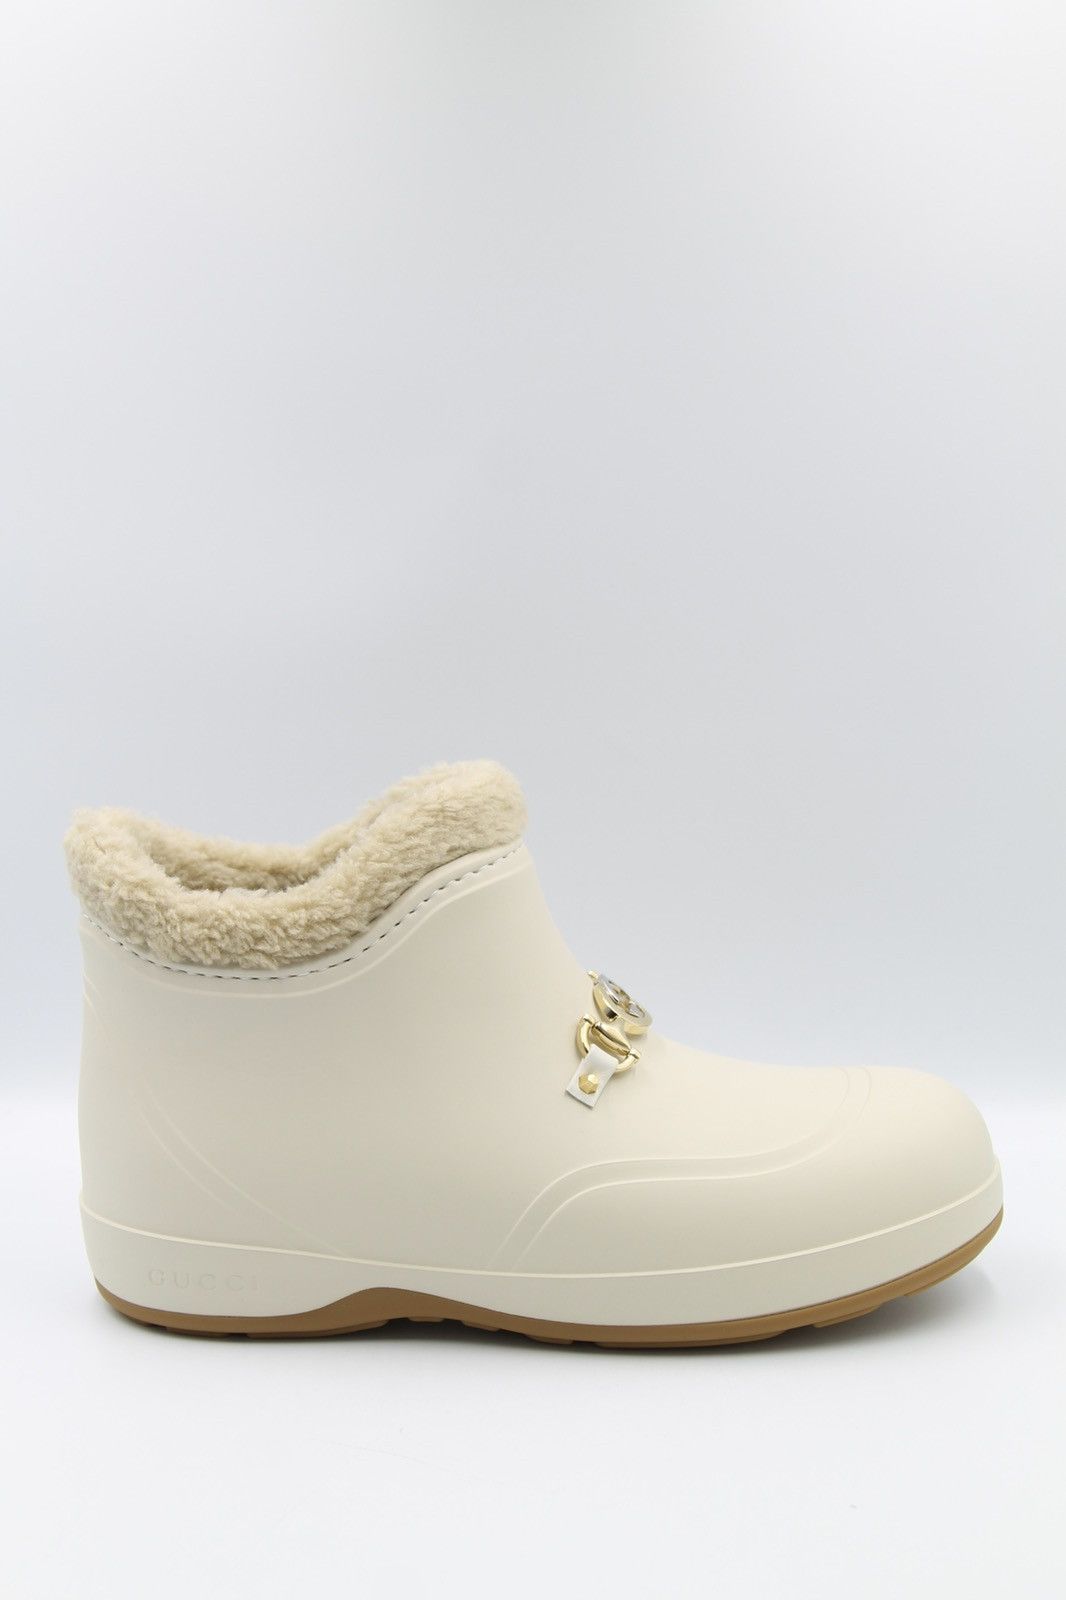 Gucci, Shoes, Nwt Gucci Kids Winter Boots